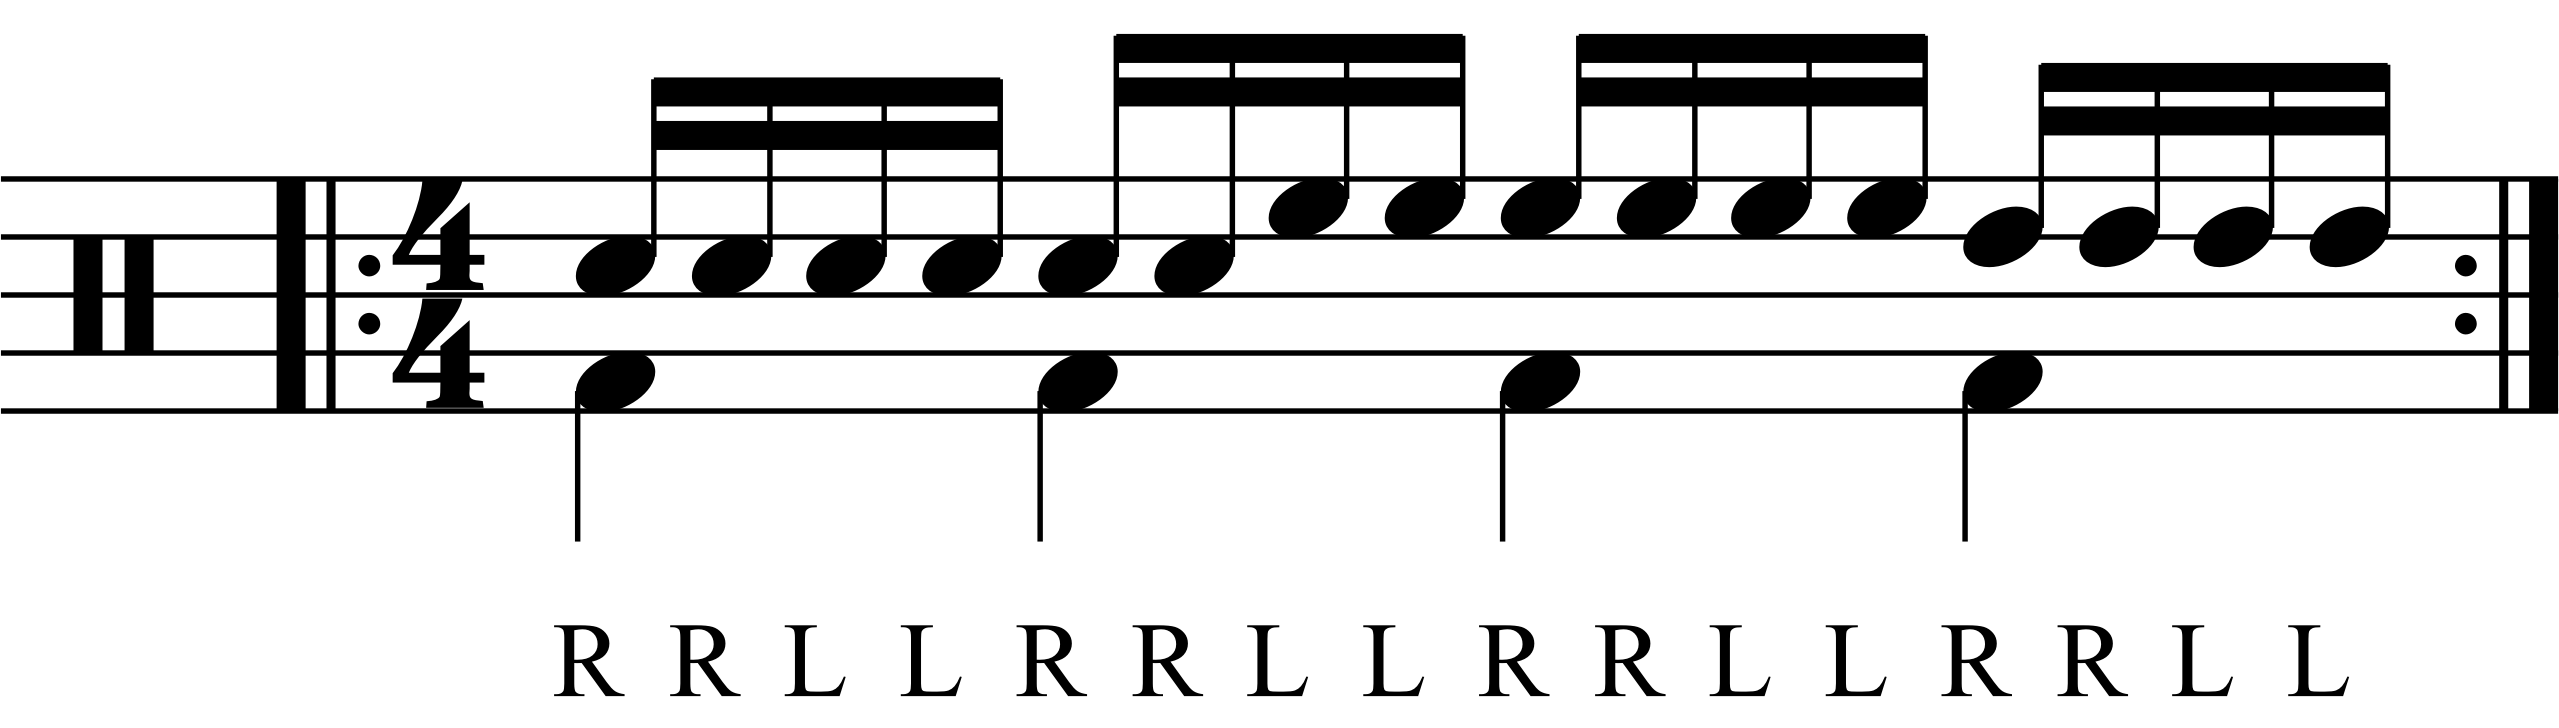 Double stroke roll played as groups of six